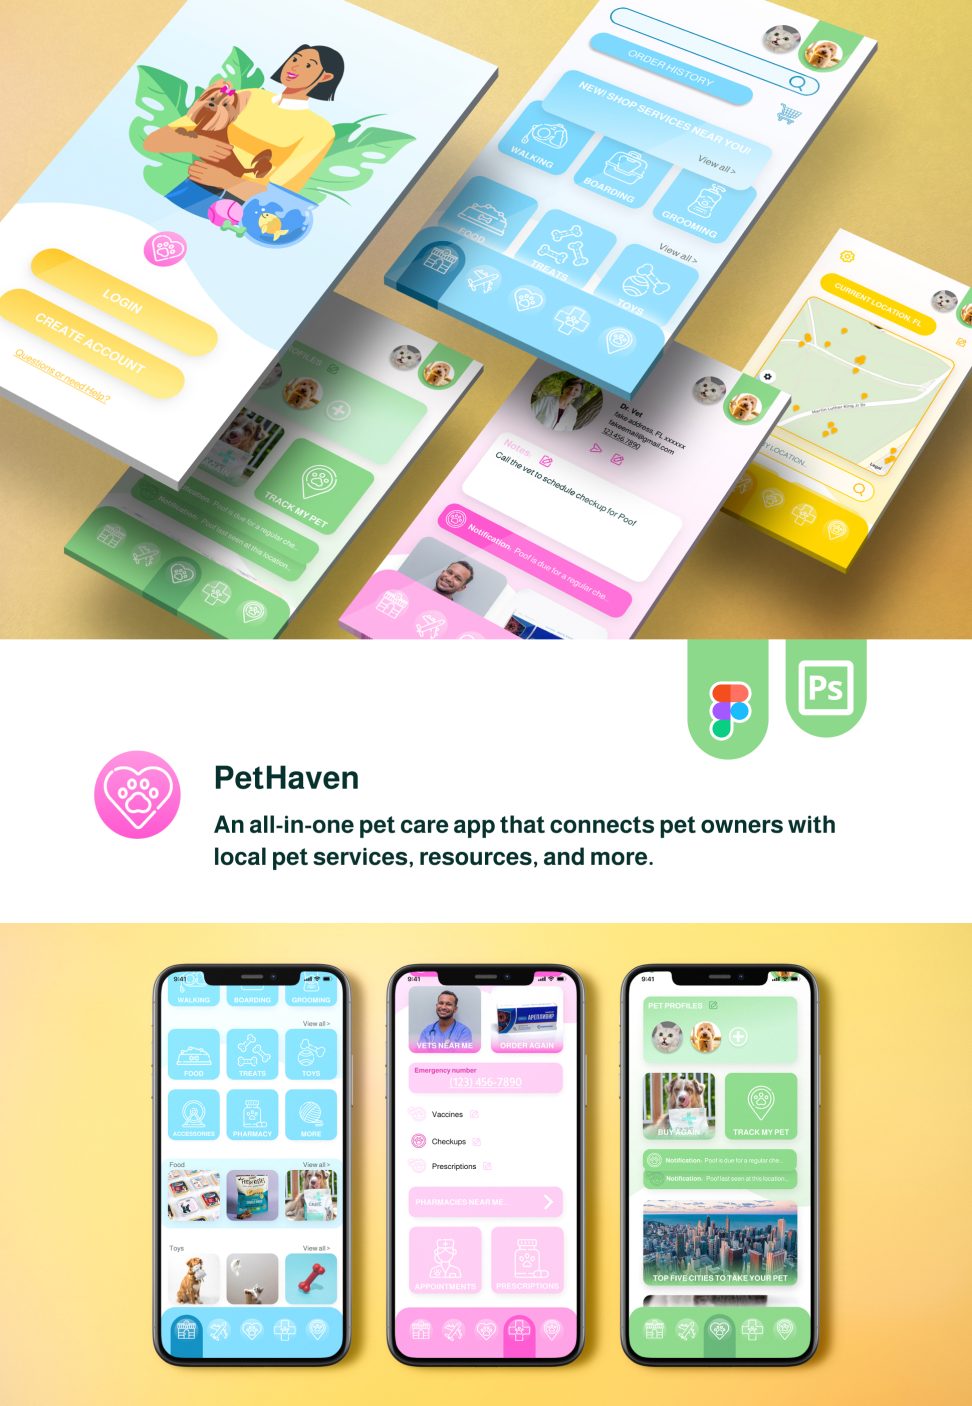 Pet Haven app concept and UI design. iPhone mockups of the light theme and primary color design of a conceptual pet care app case study.